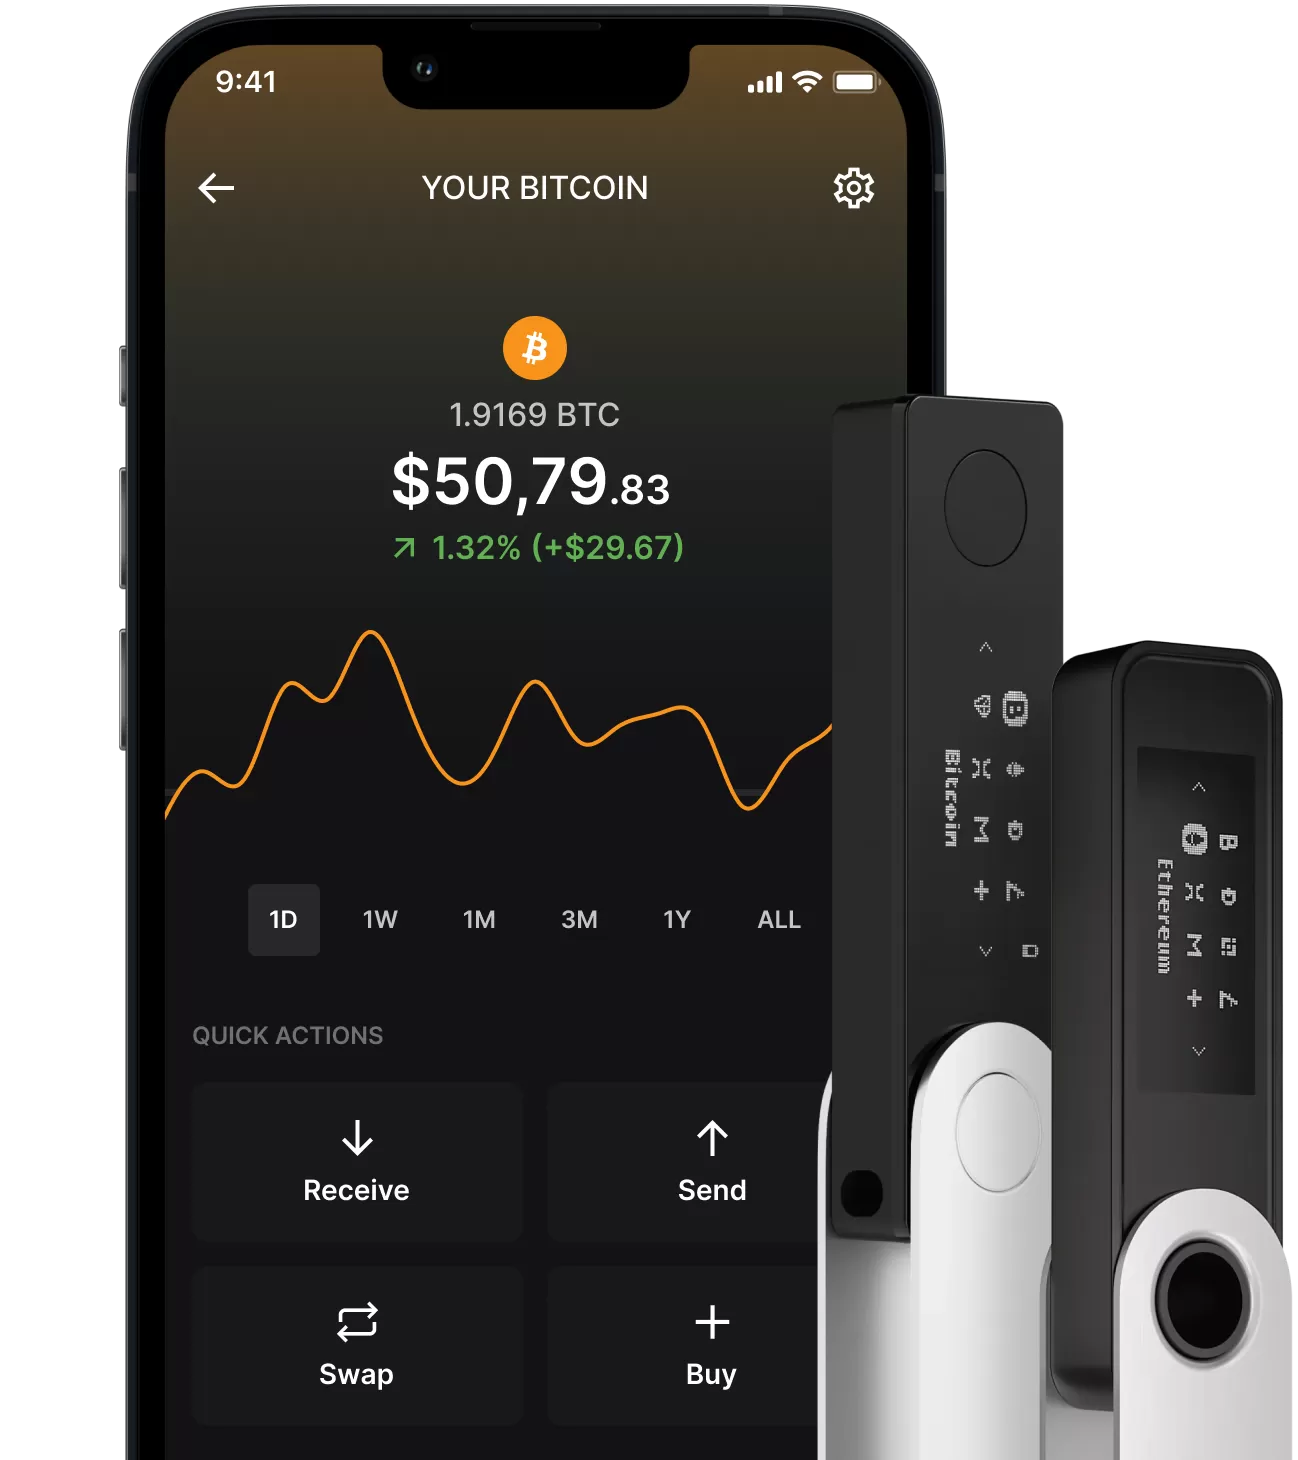 How to Send Bitcoin from a Ledger Nano S - CoinCentral